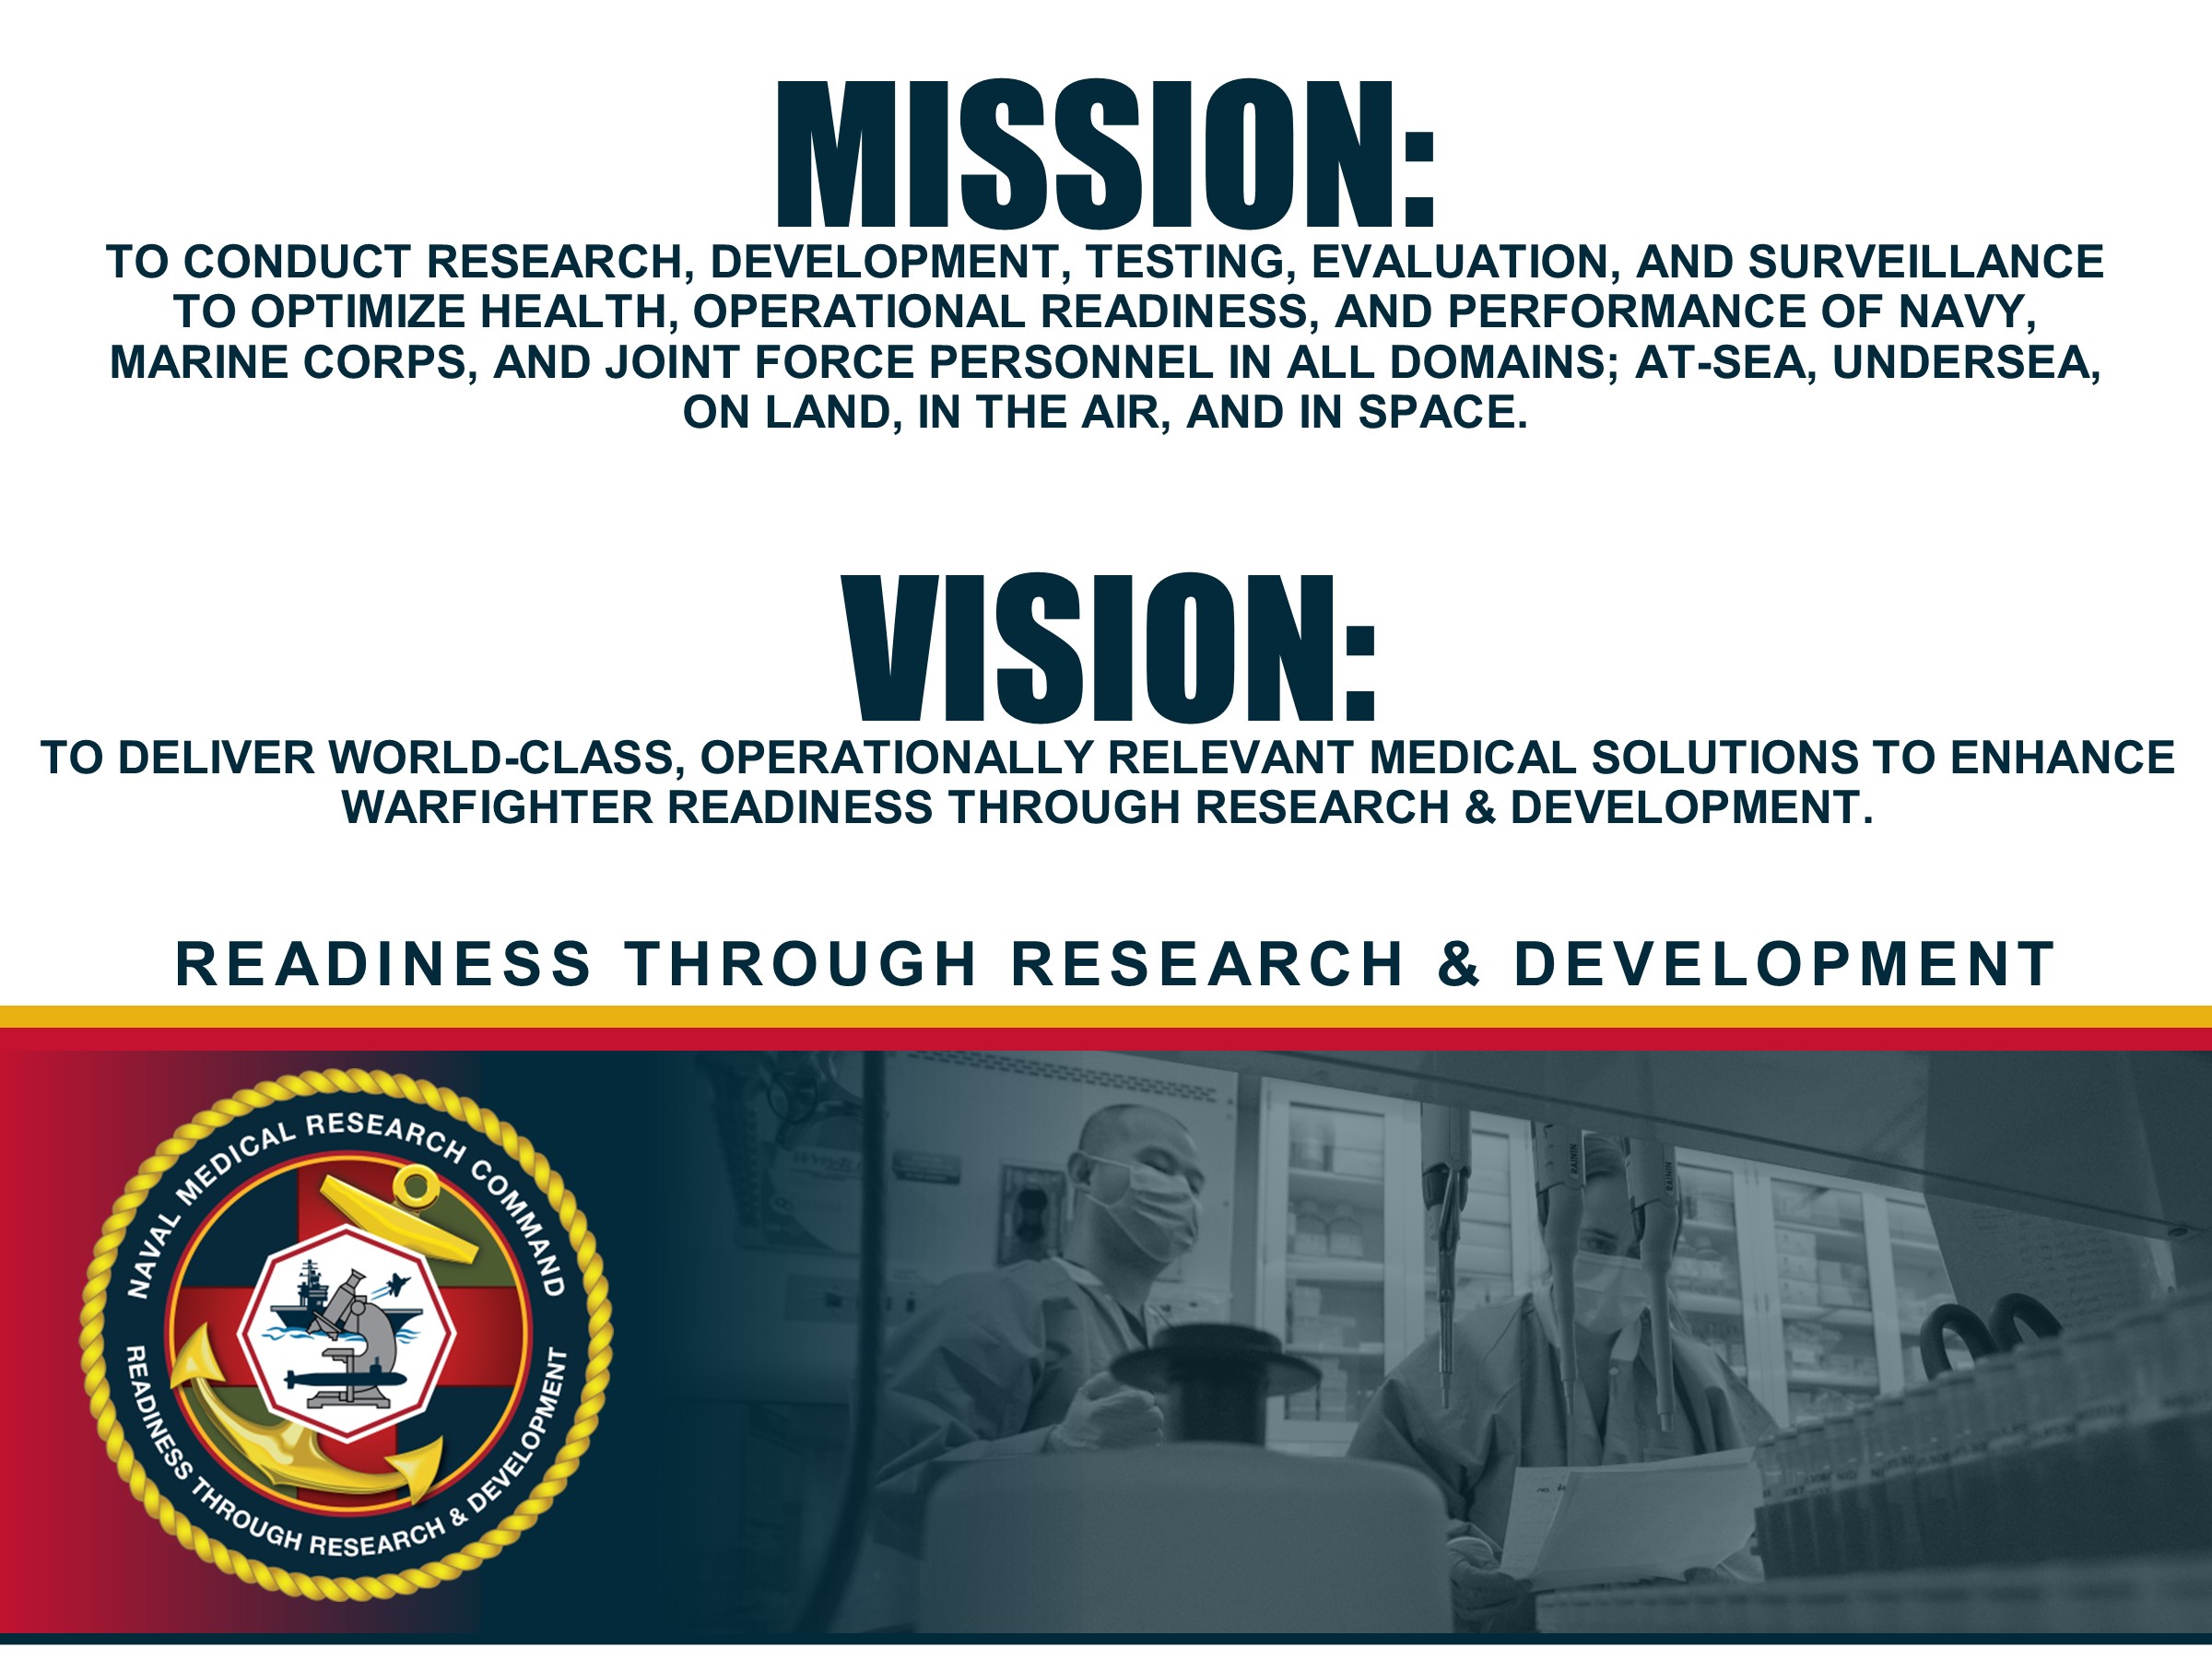 NMRC Mission and Vision